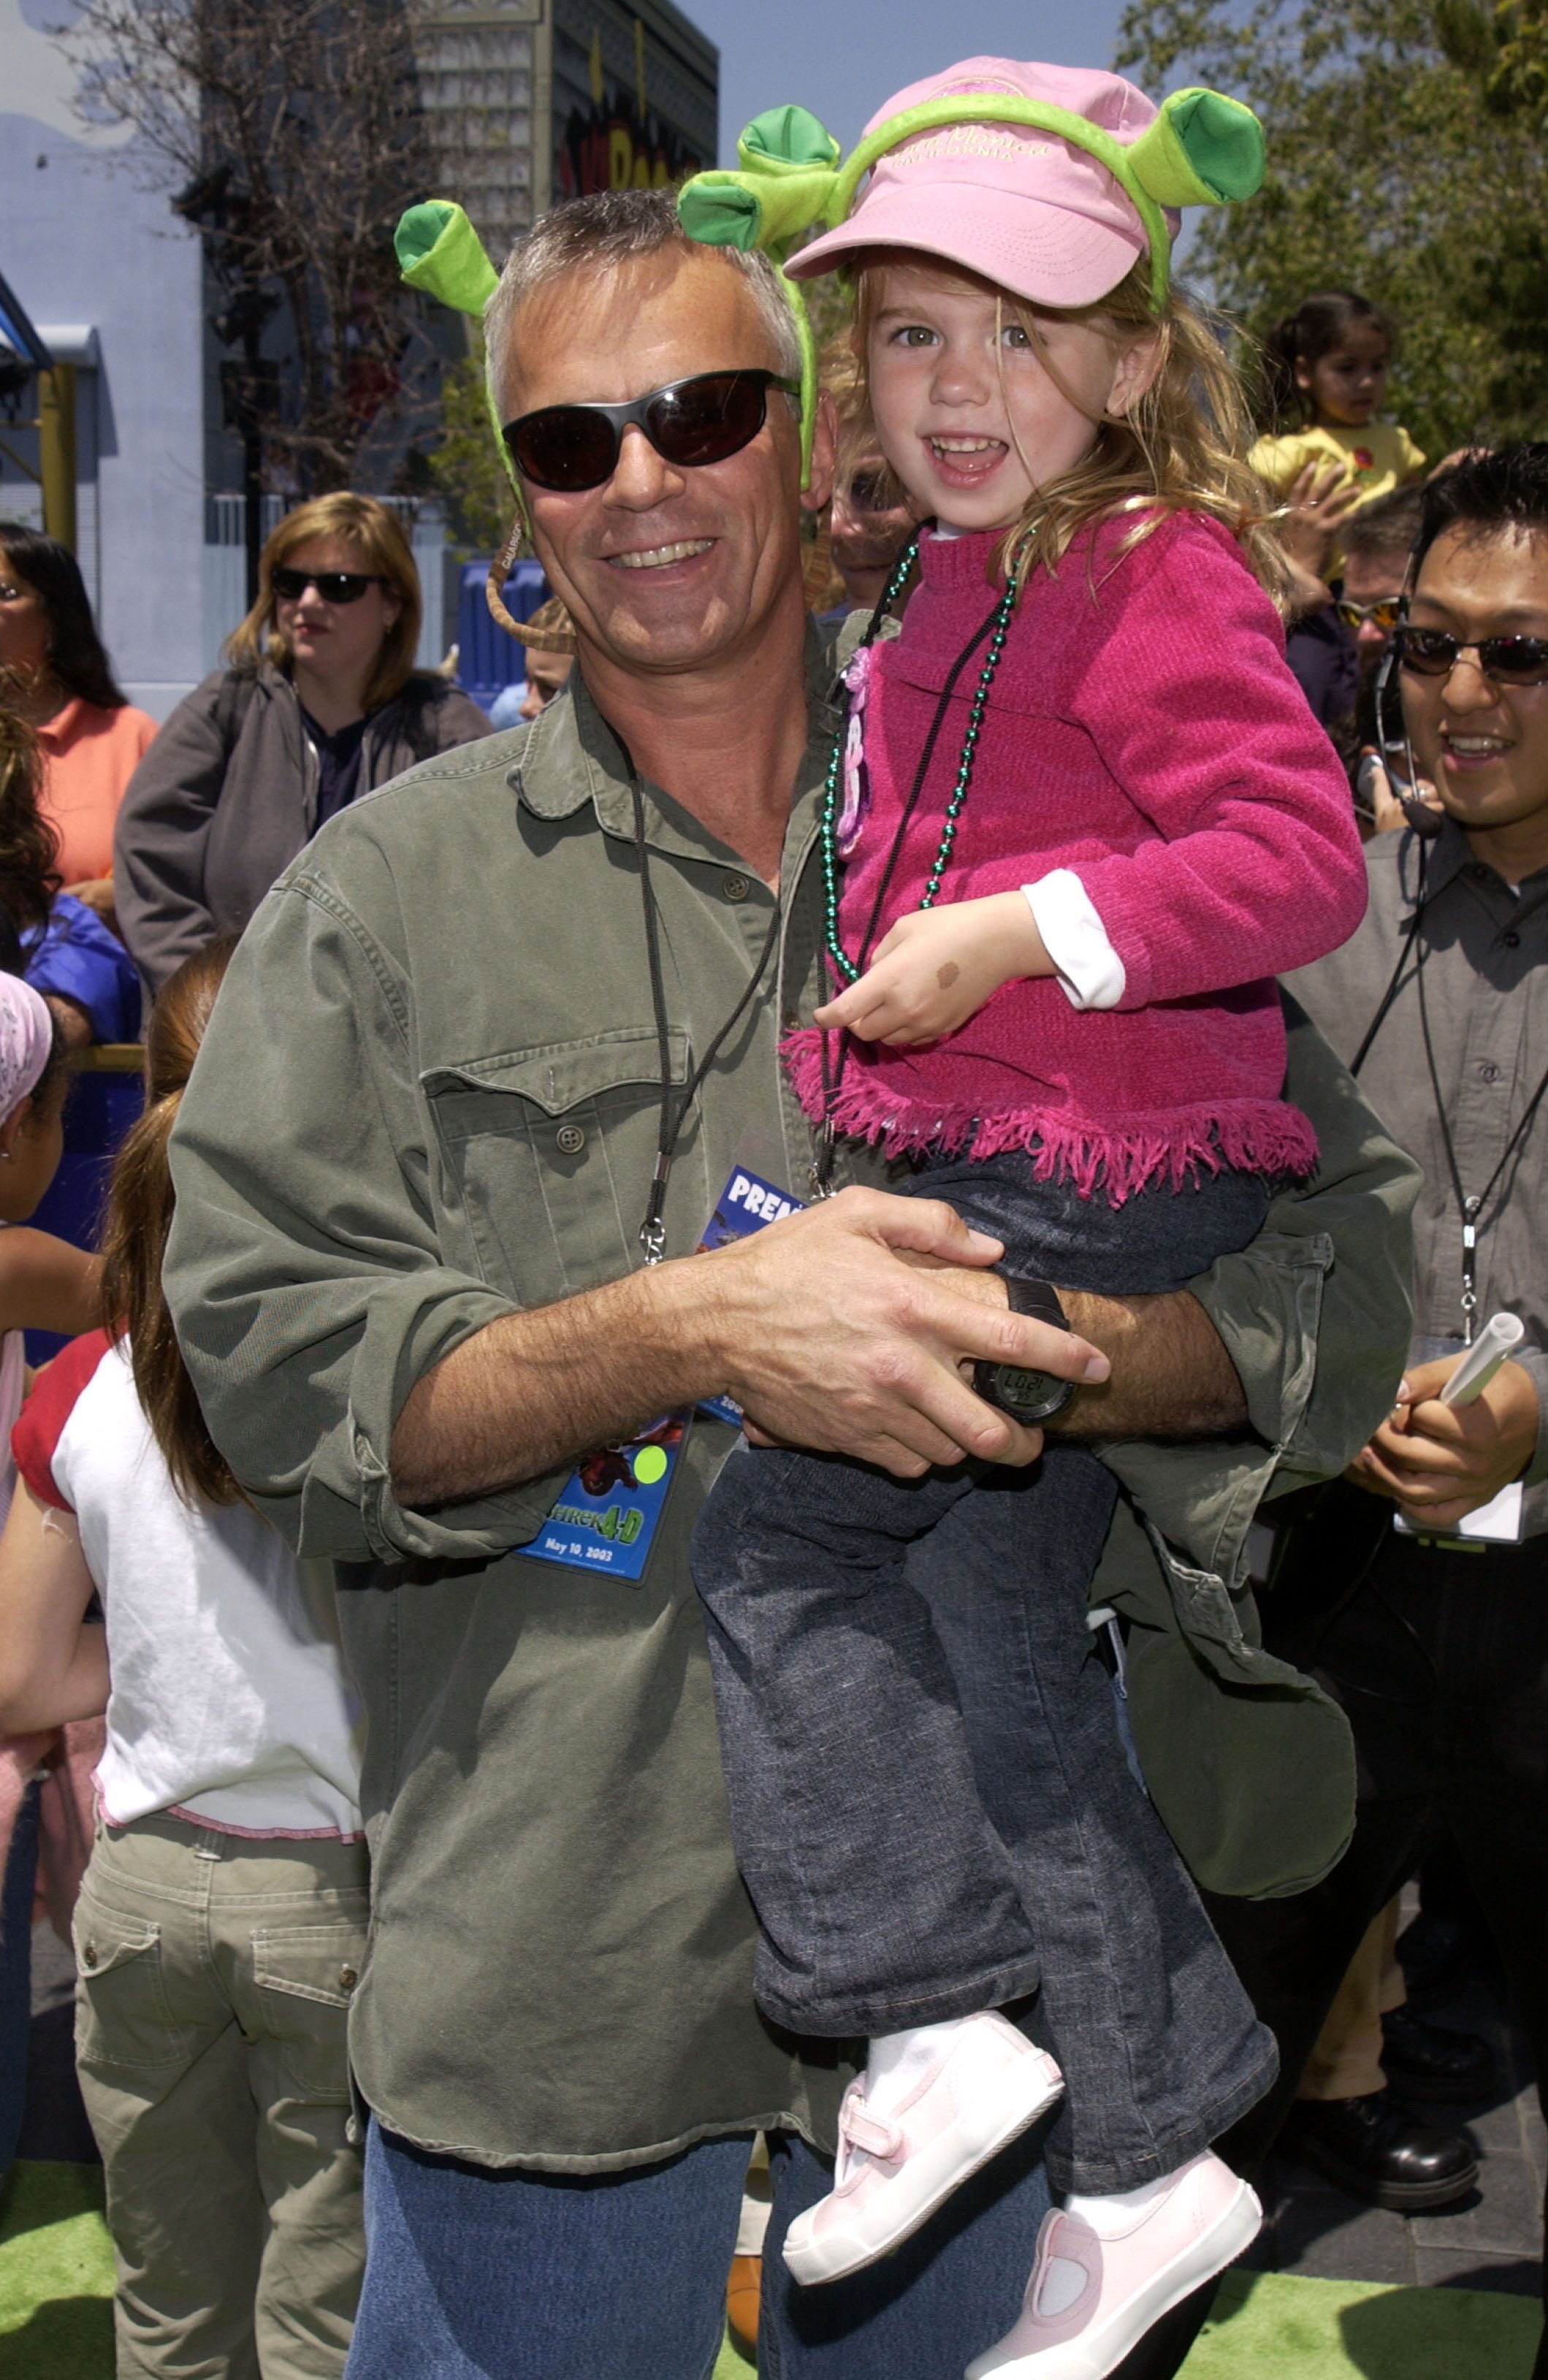 Richard Dean Anderson with his daughter at the premier of "Shrek" in California 2003. | Source: Getty Images 